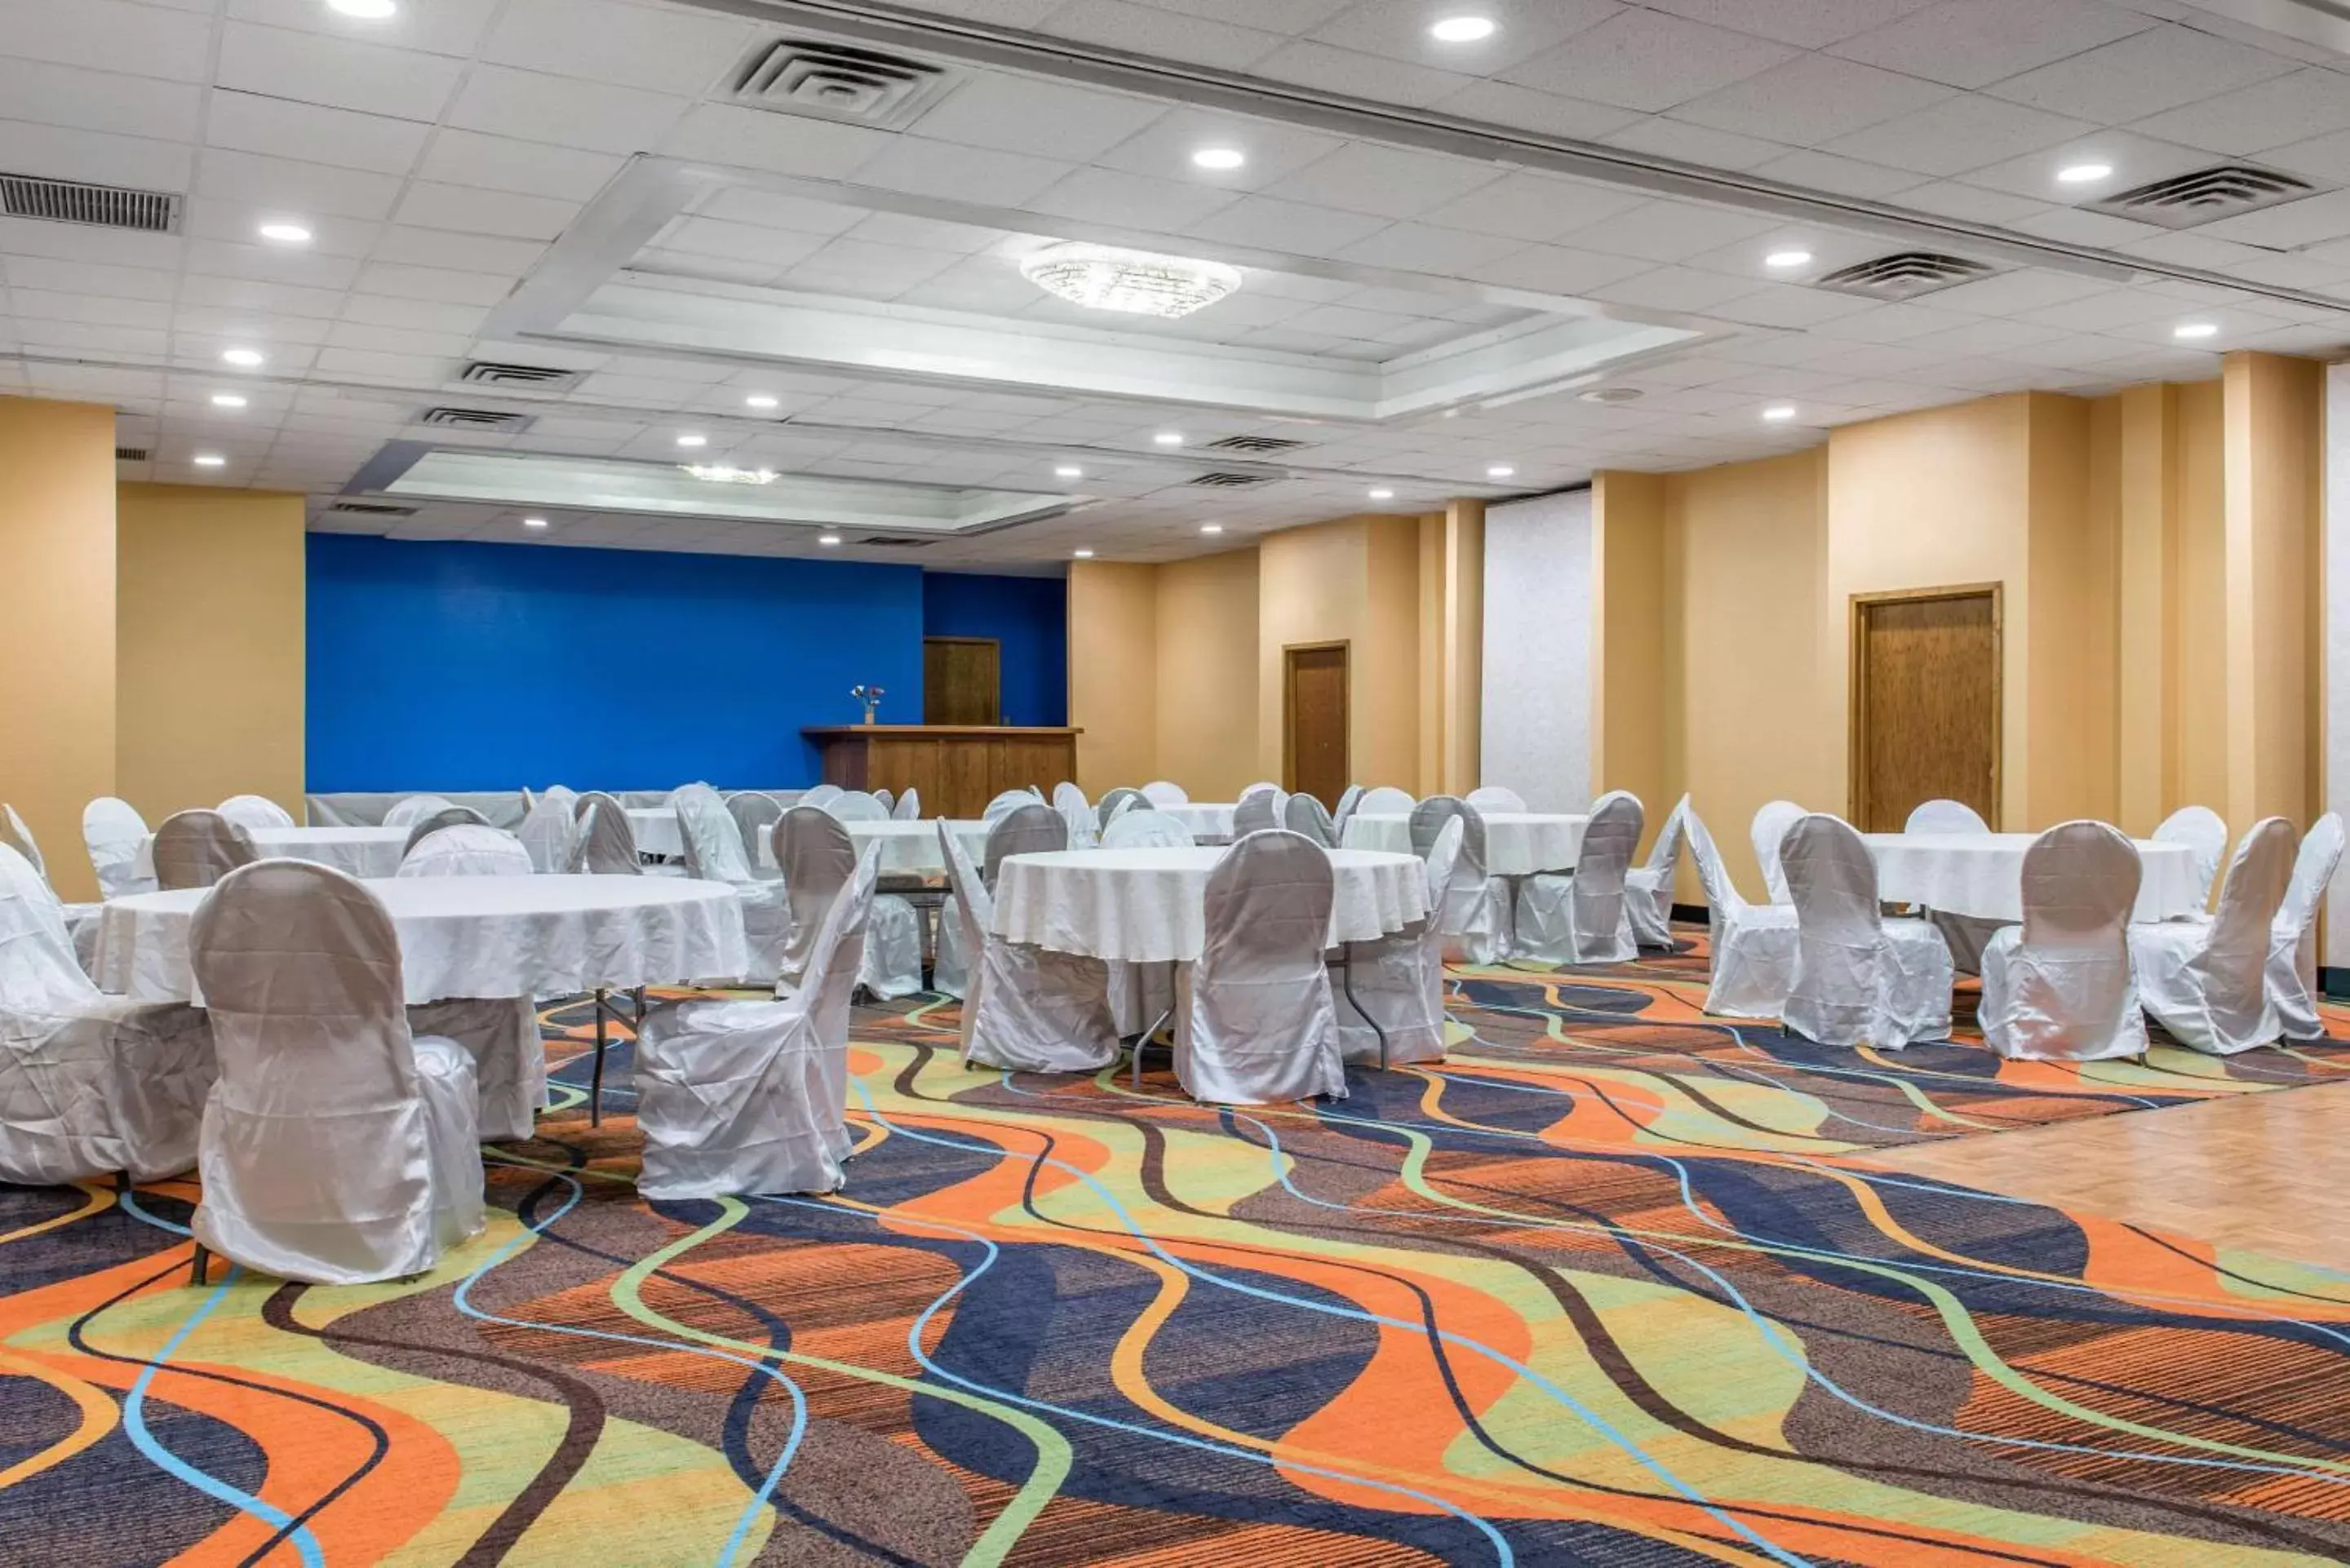 On site, Banquet Facilities in Quality Inn & Suites Bedford West